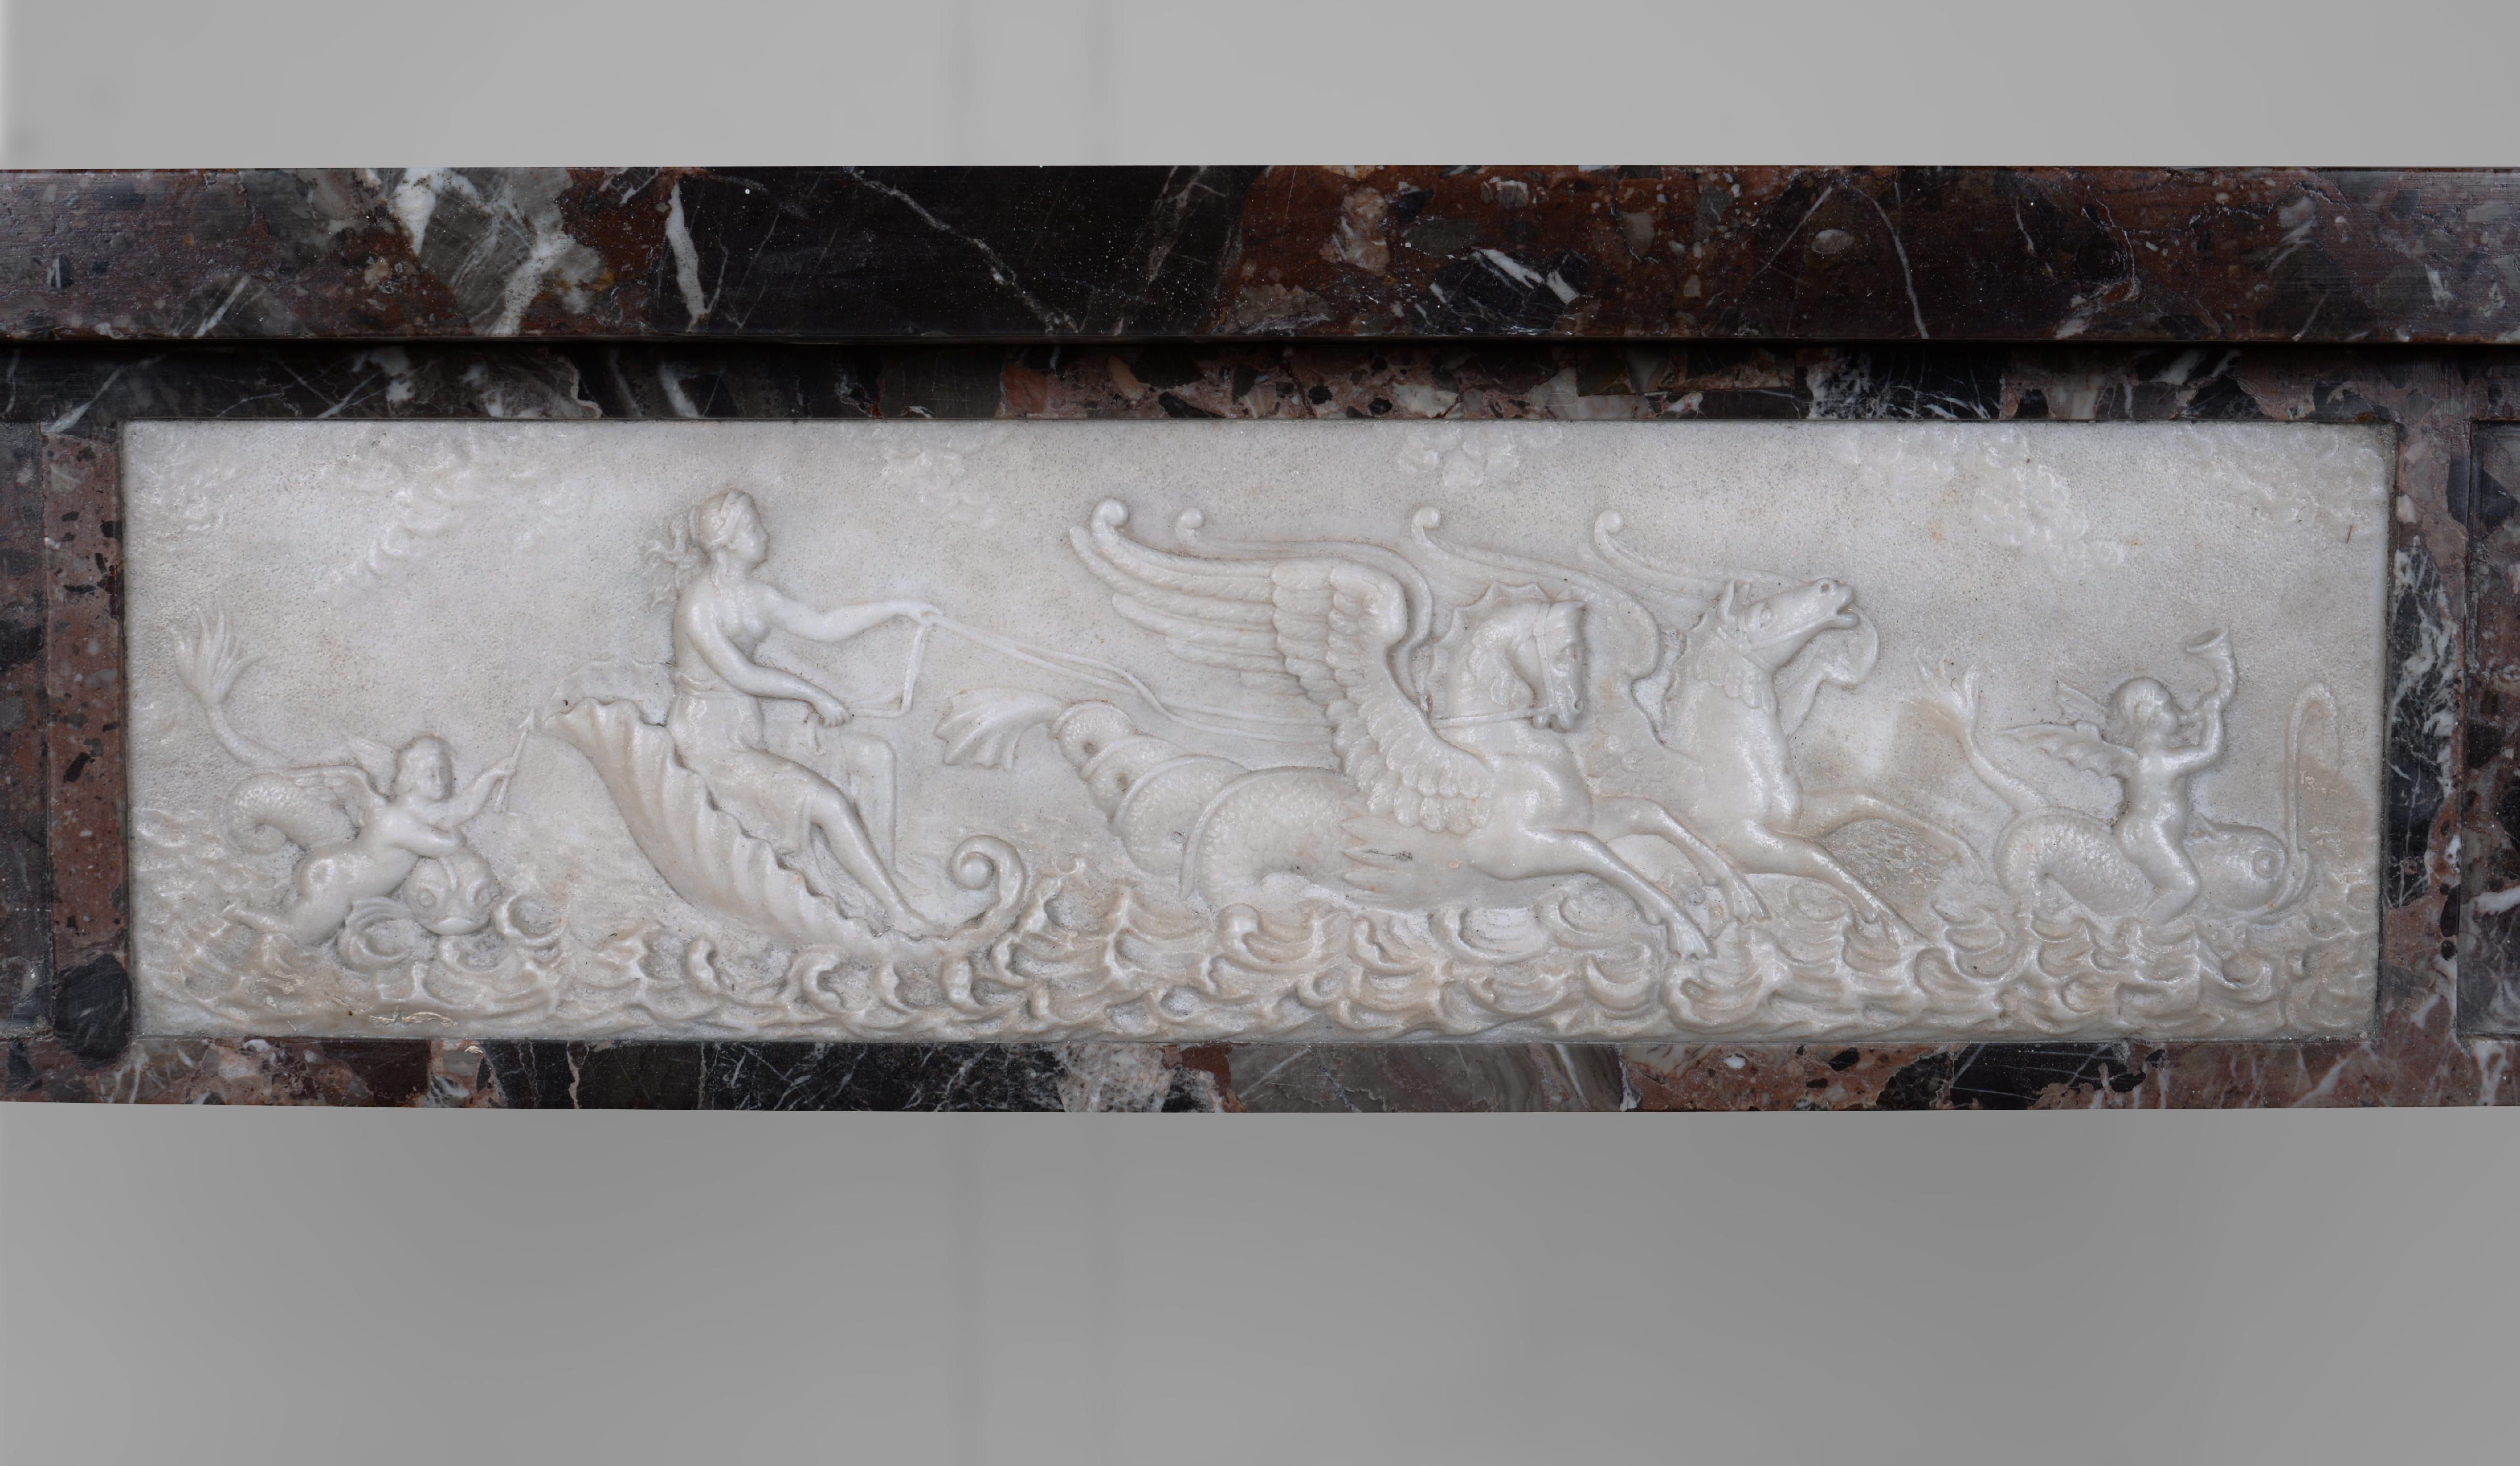 This neo Louis XVI style fireplace was sculpted in the 19th century in imperator and statuary marble. Its front part is decorated in its center with a frieze in statuary Carrara marble representing a woman in a chariot on the water pulled by two